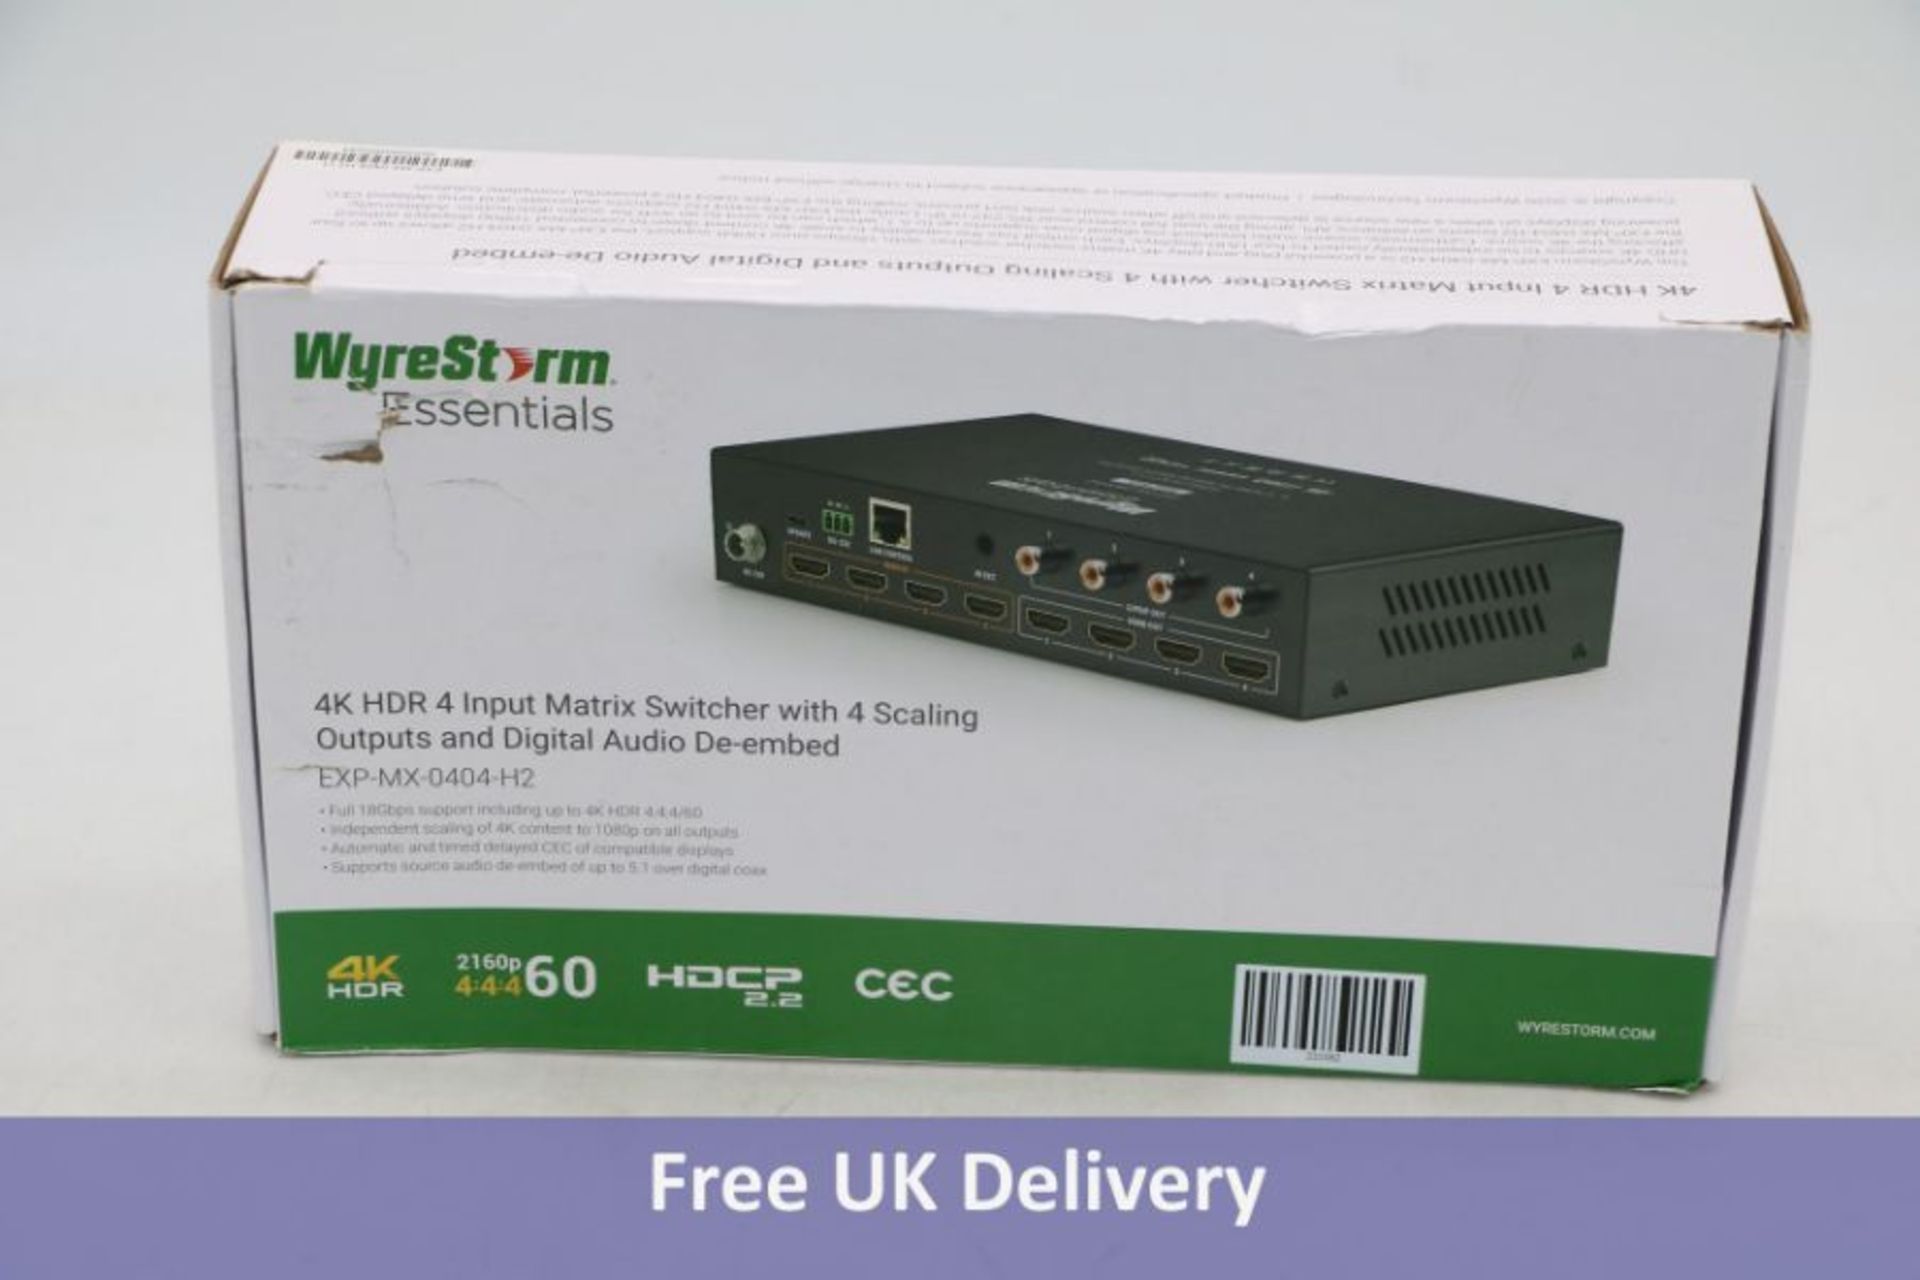 Wyre Storm 4-input and 4-output 4K HDR HDMI scale matrix switcher with embedded S/PDIF digital audio